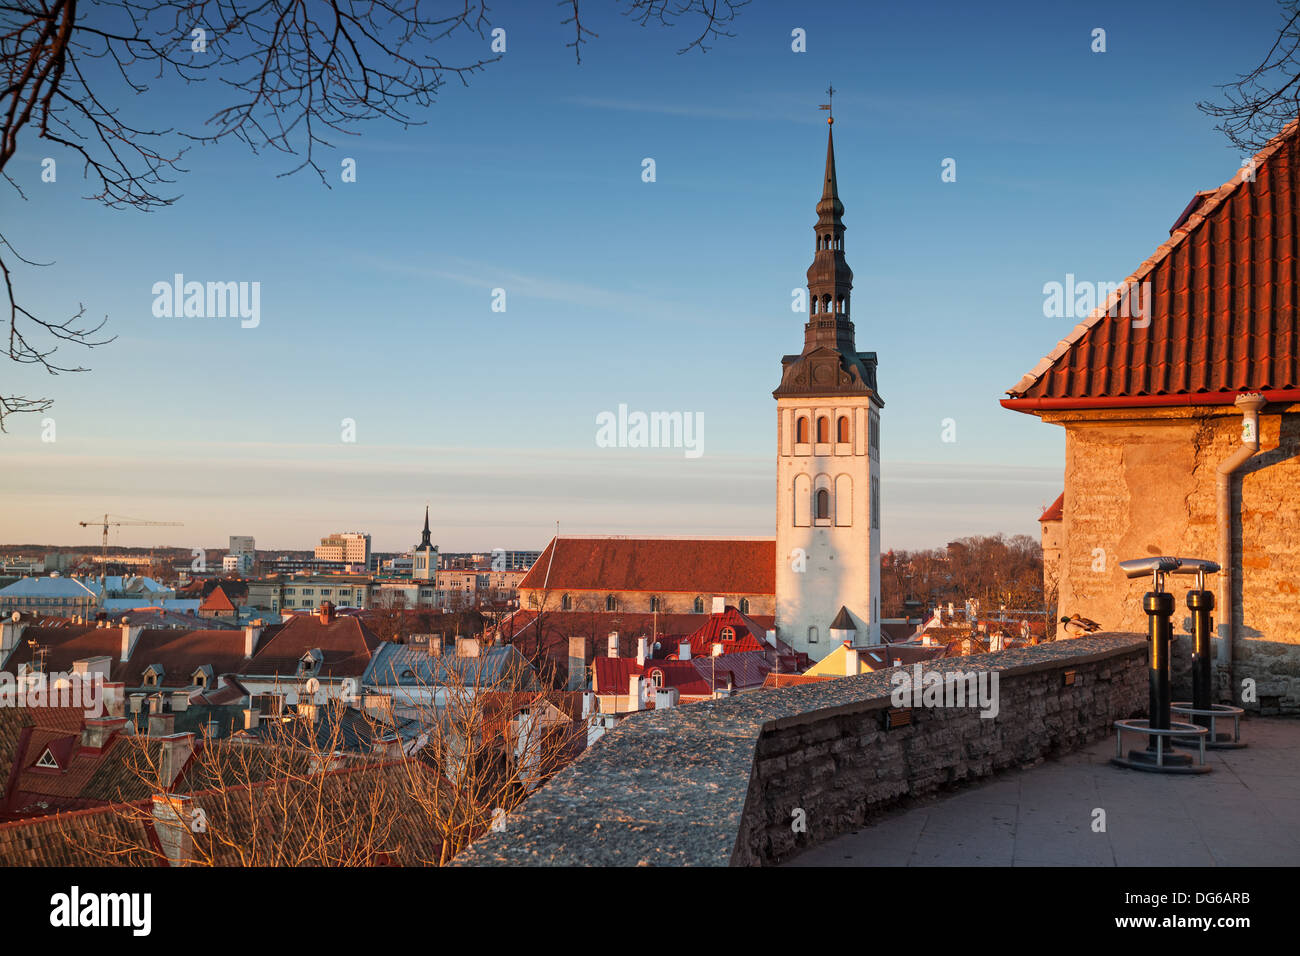 Early spring morning on popular viewpoint in old town of Tallinn, Estonia Stock Photo